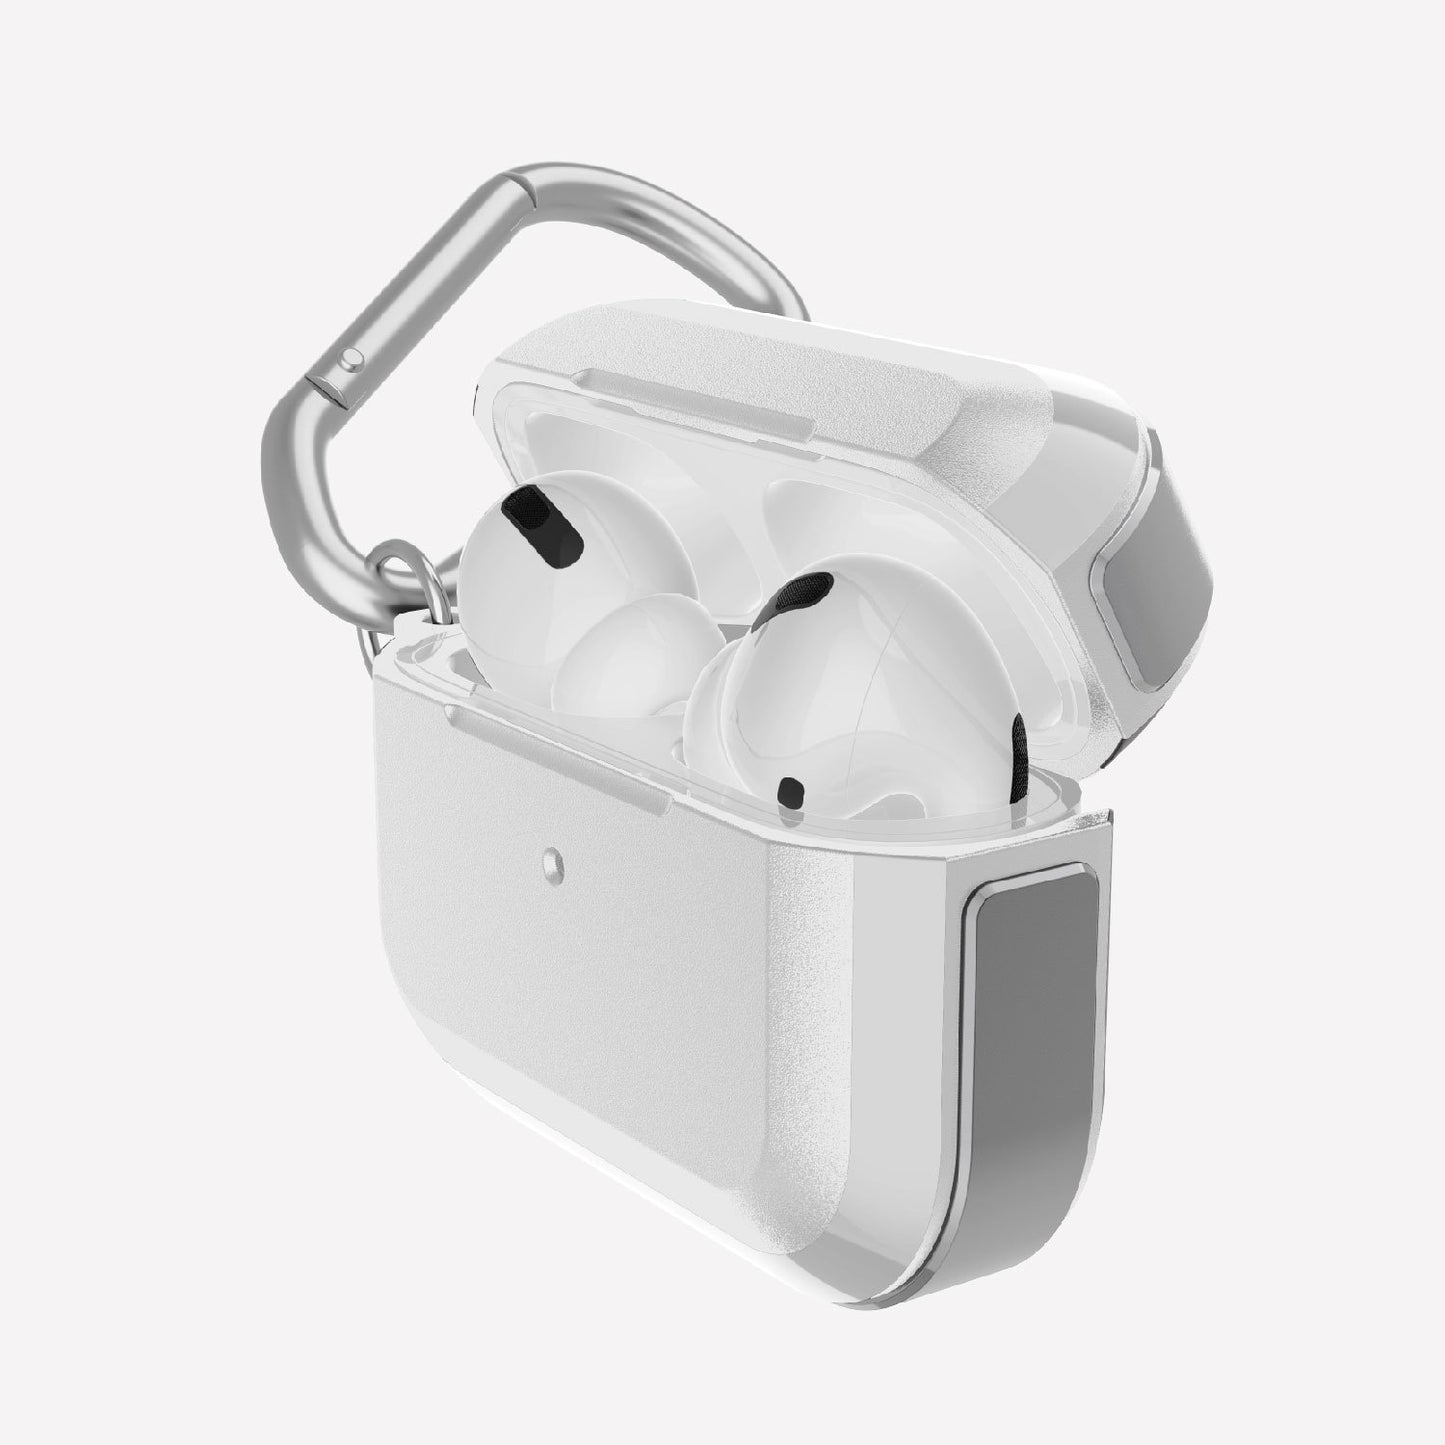 A white Raptic TREK case for wireless charging Apple AirPods Pro on a white surface.